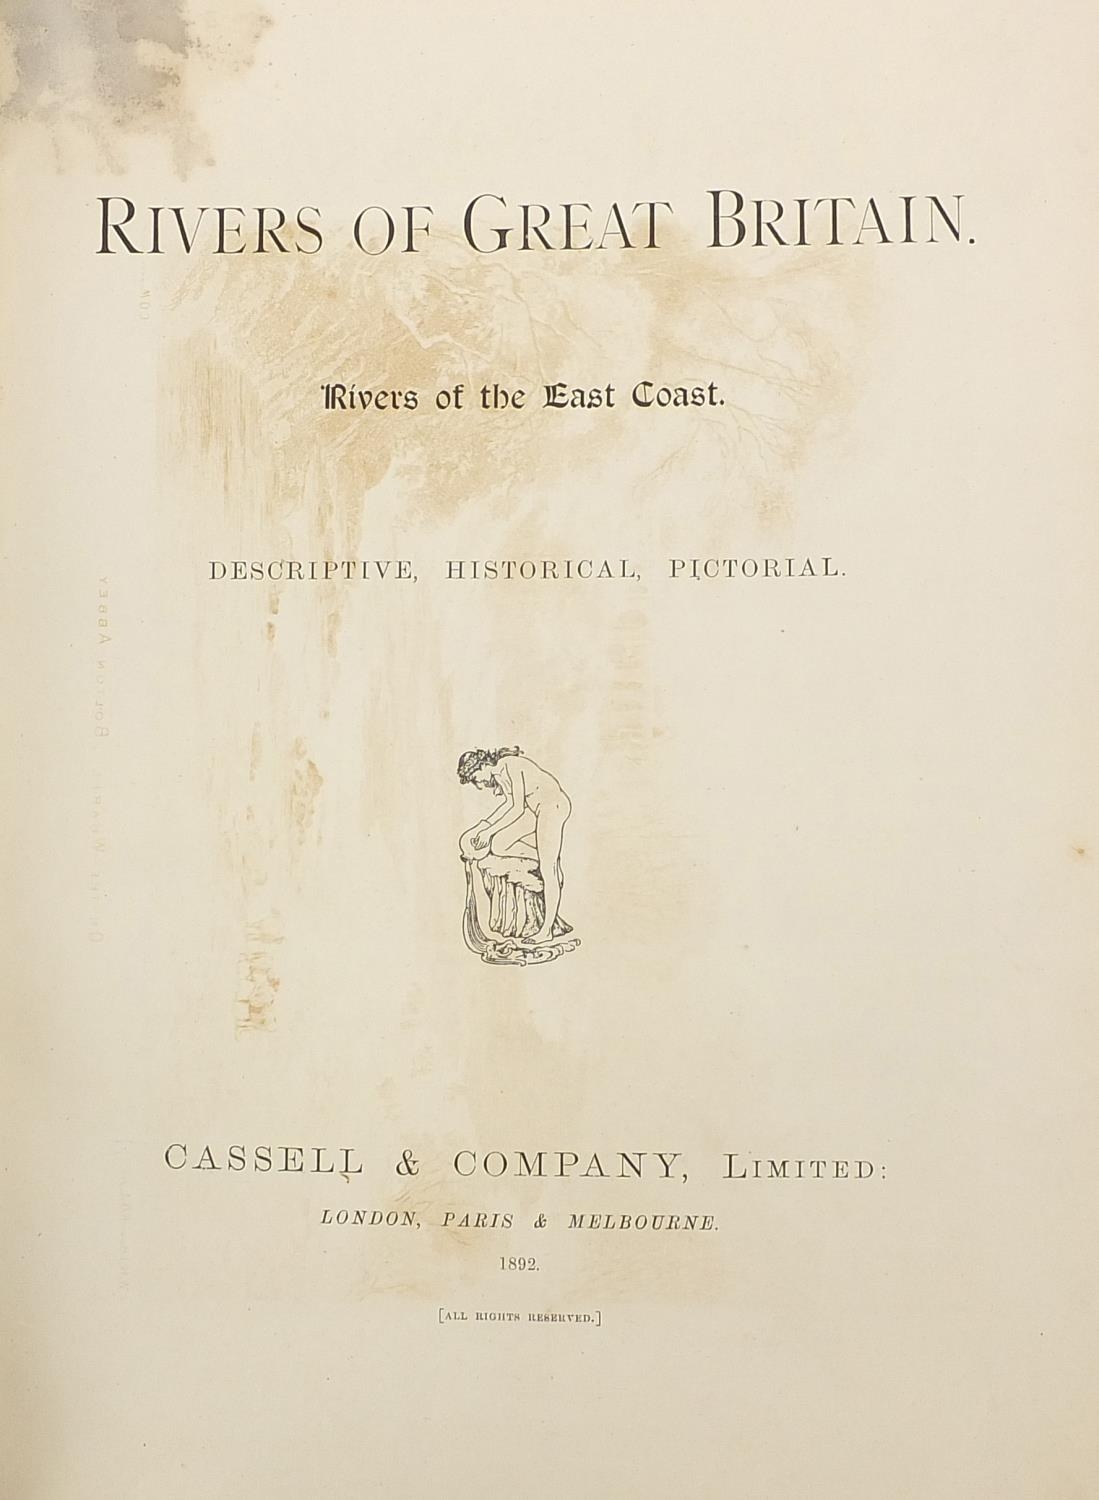 Rivers of Great Britain, Rivers of the East Coast, hardback book published Cassell & Company 1892 - Image 2 of 3